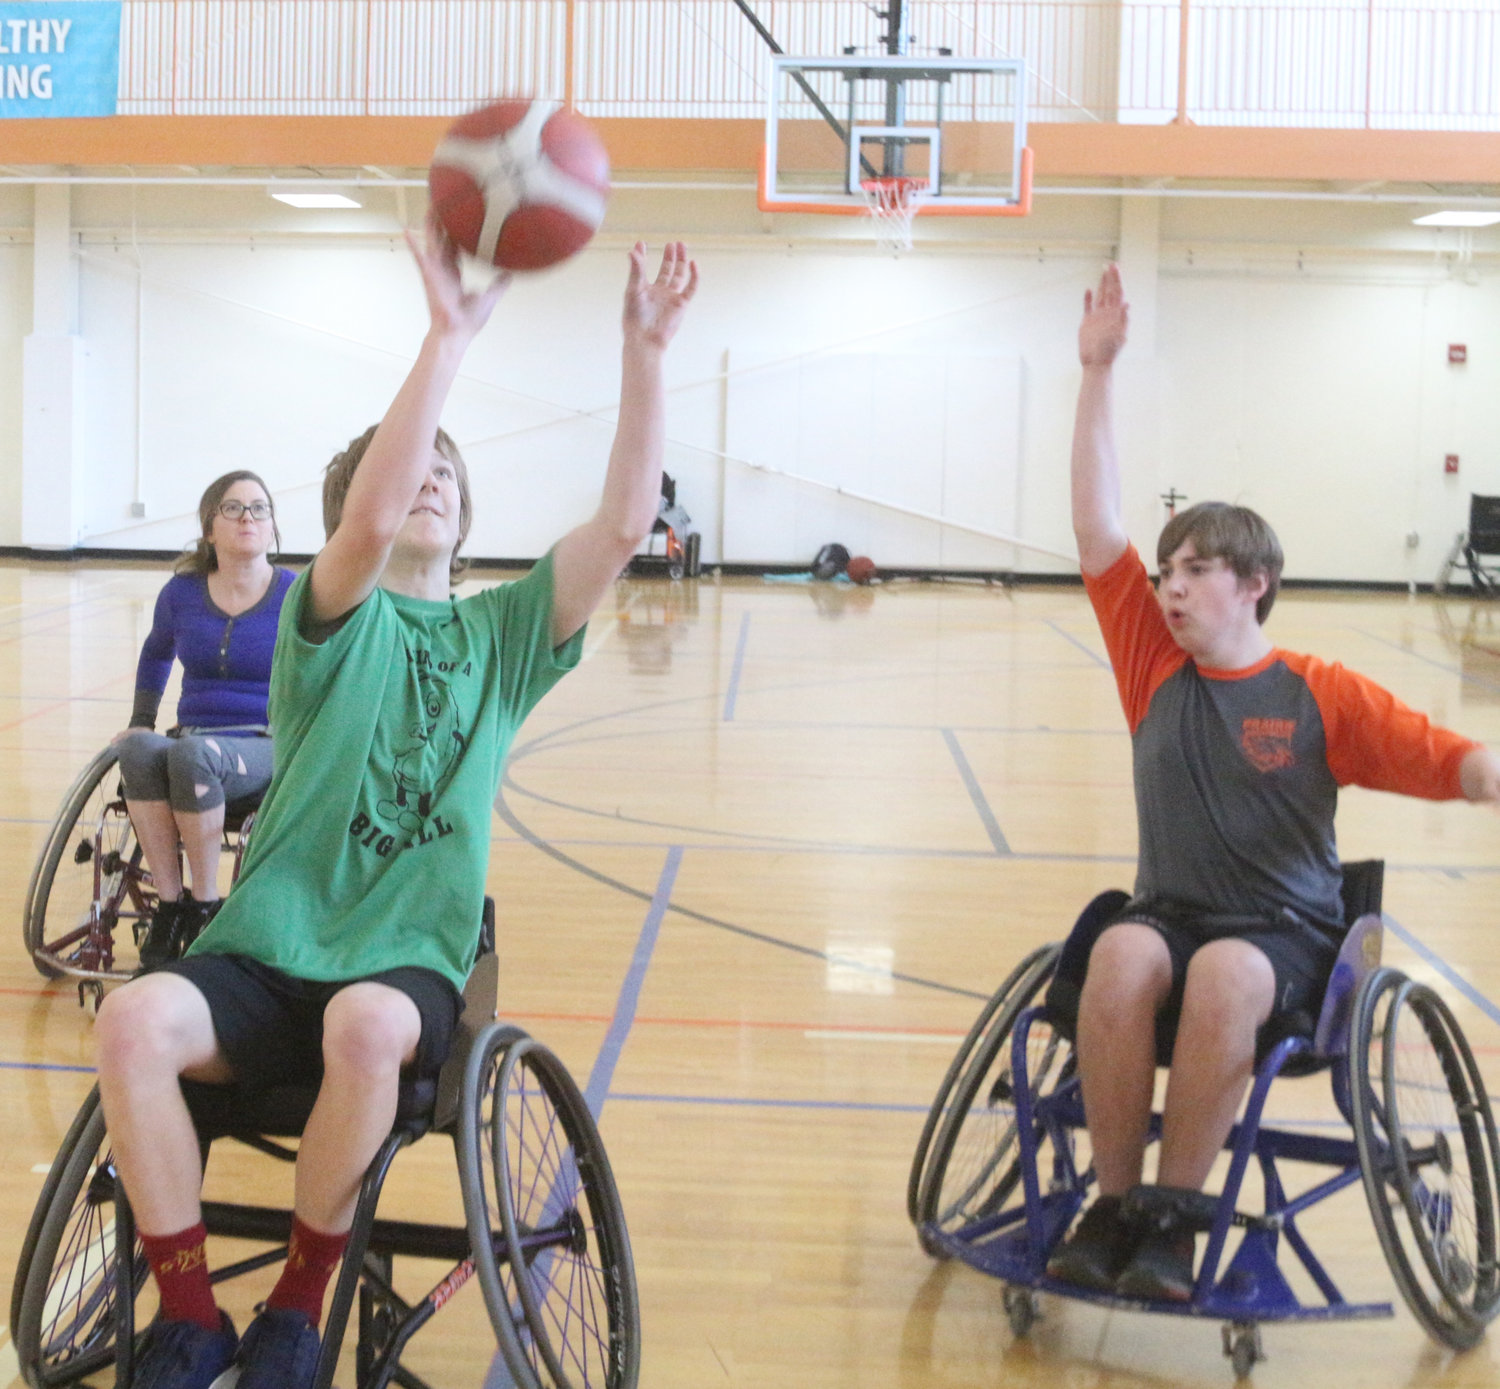 3-on-3 wheelchair basketball tournament fundraiser at Parkside Activities Center in Wellman on Saturday, March 7.